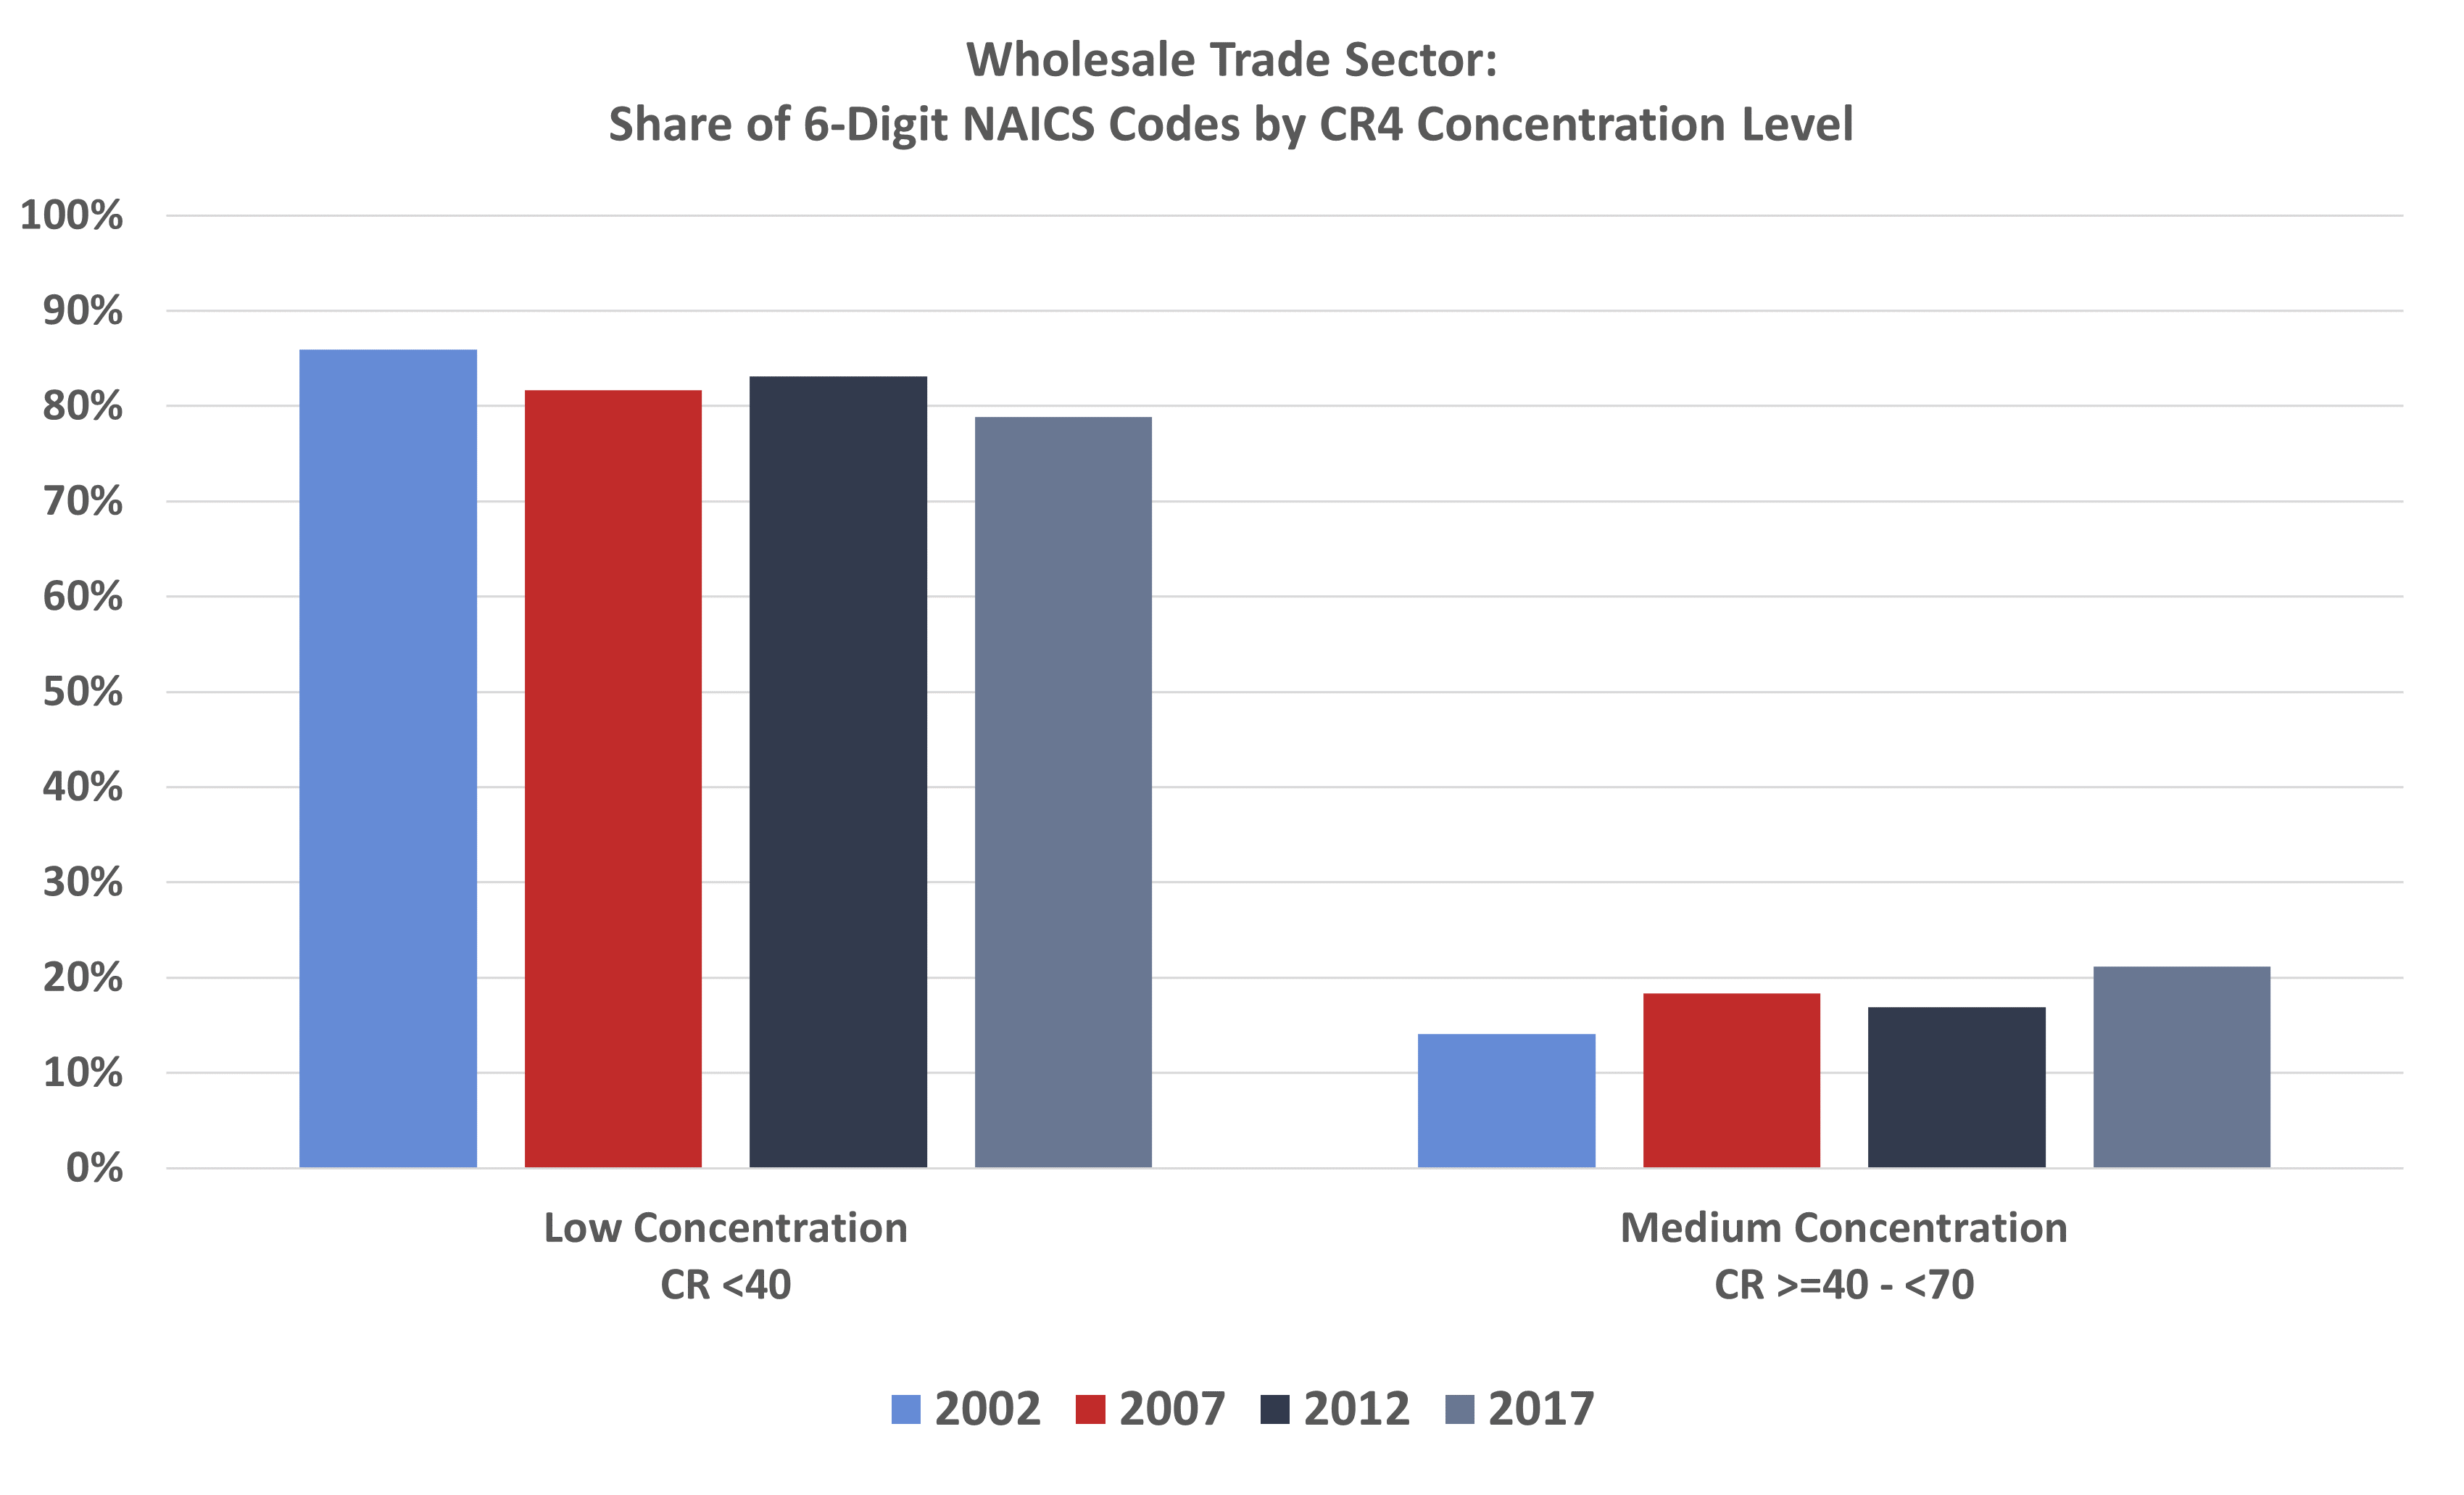 Wholesale Trade Sector: Share of 6-Digit NAICS Codes by CR4 Concentration Level